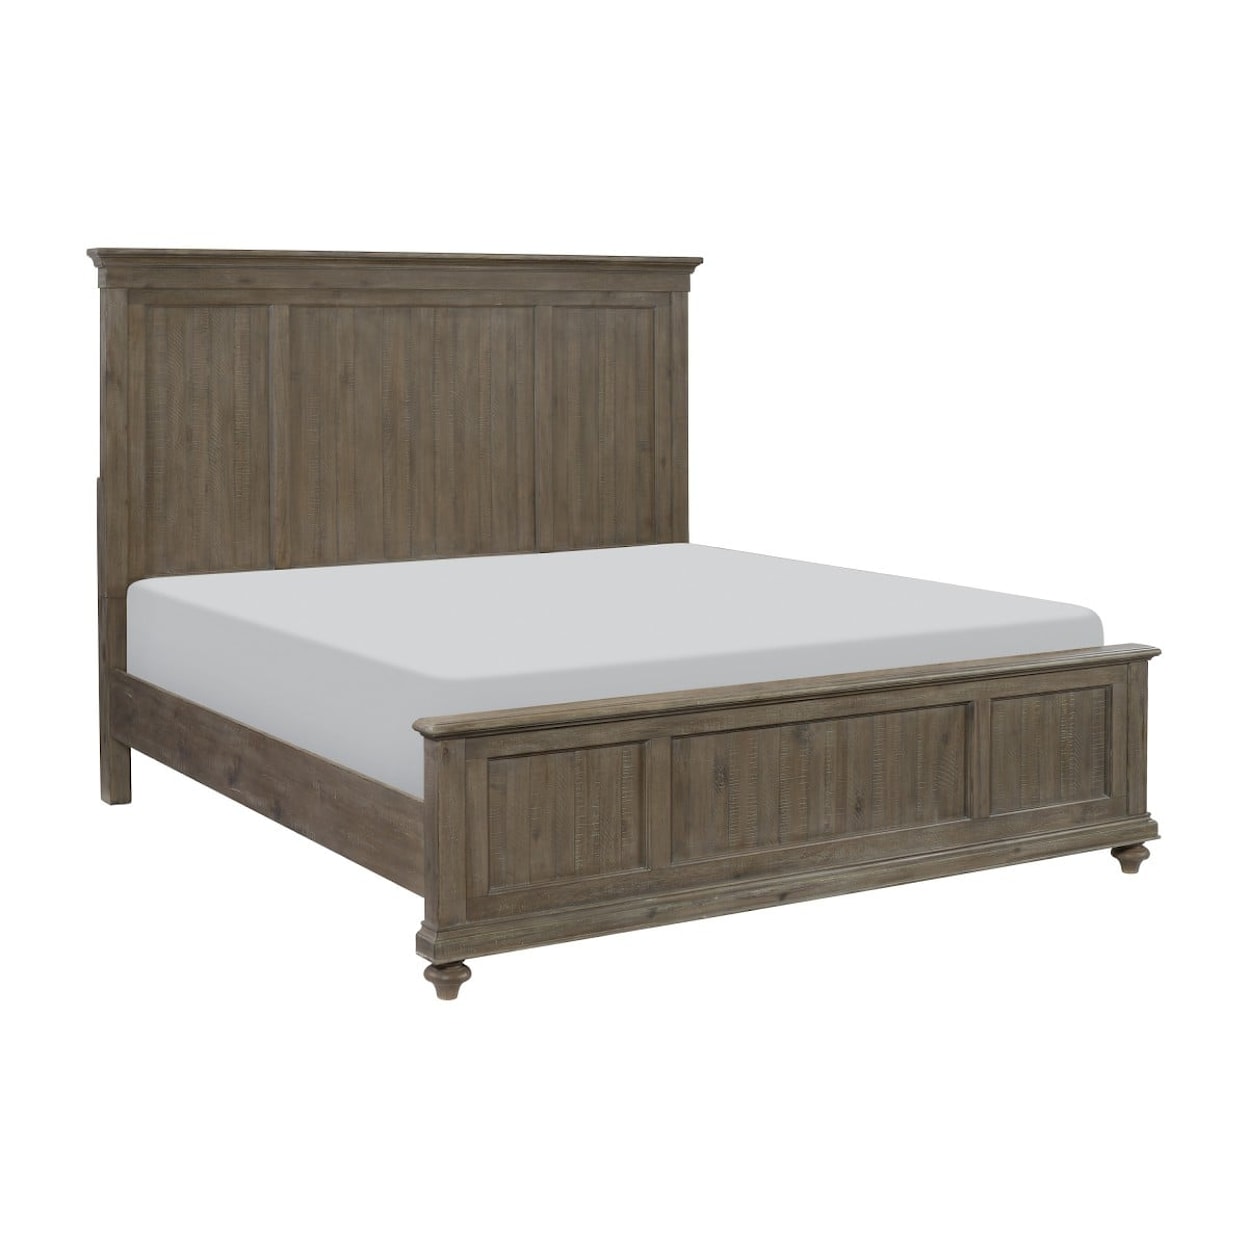 Homelegance Furniture Cardano Queen Bed